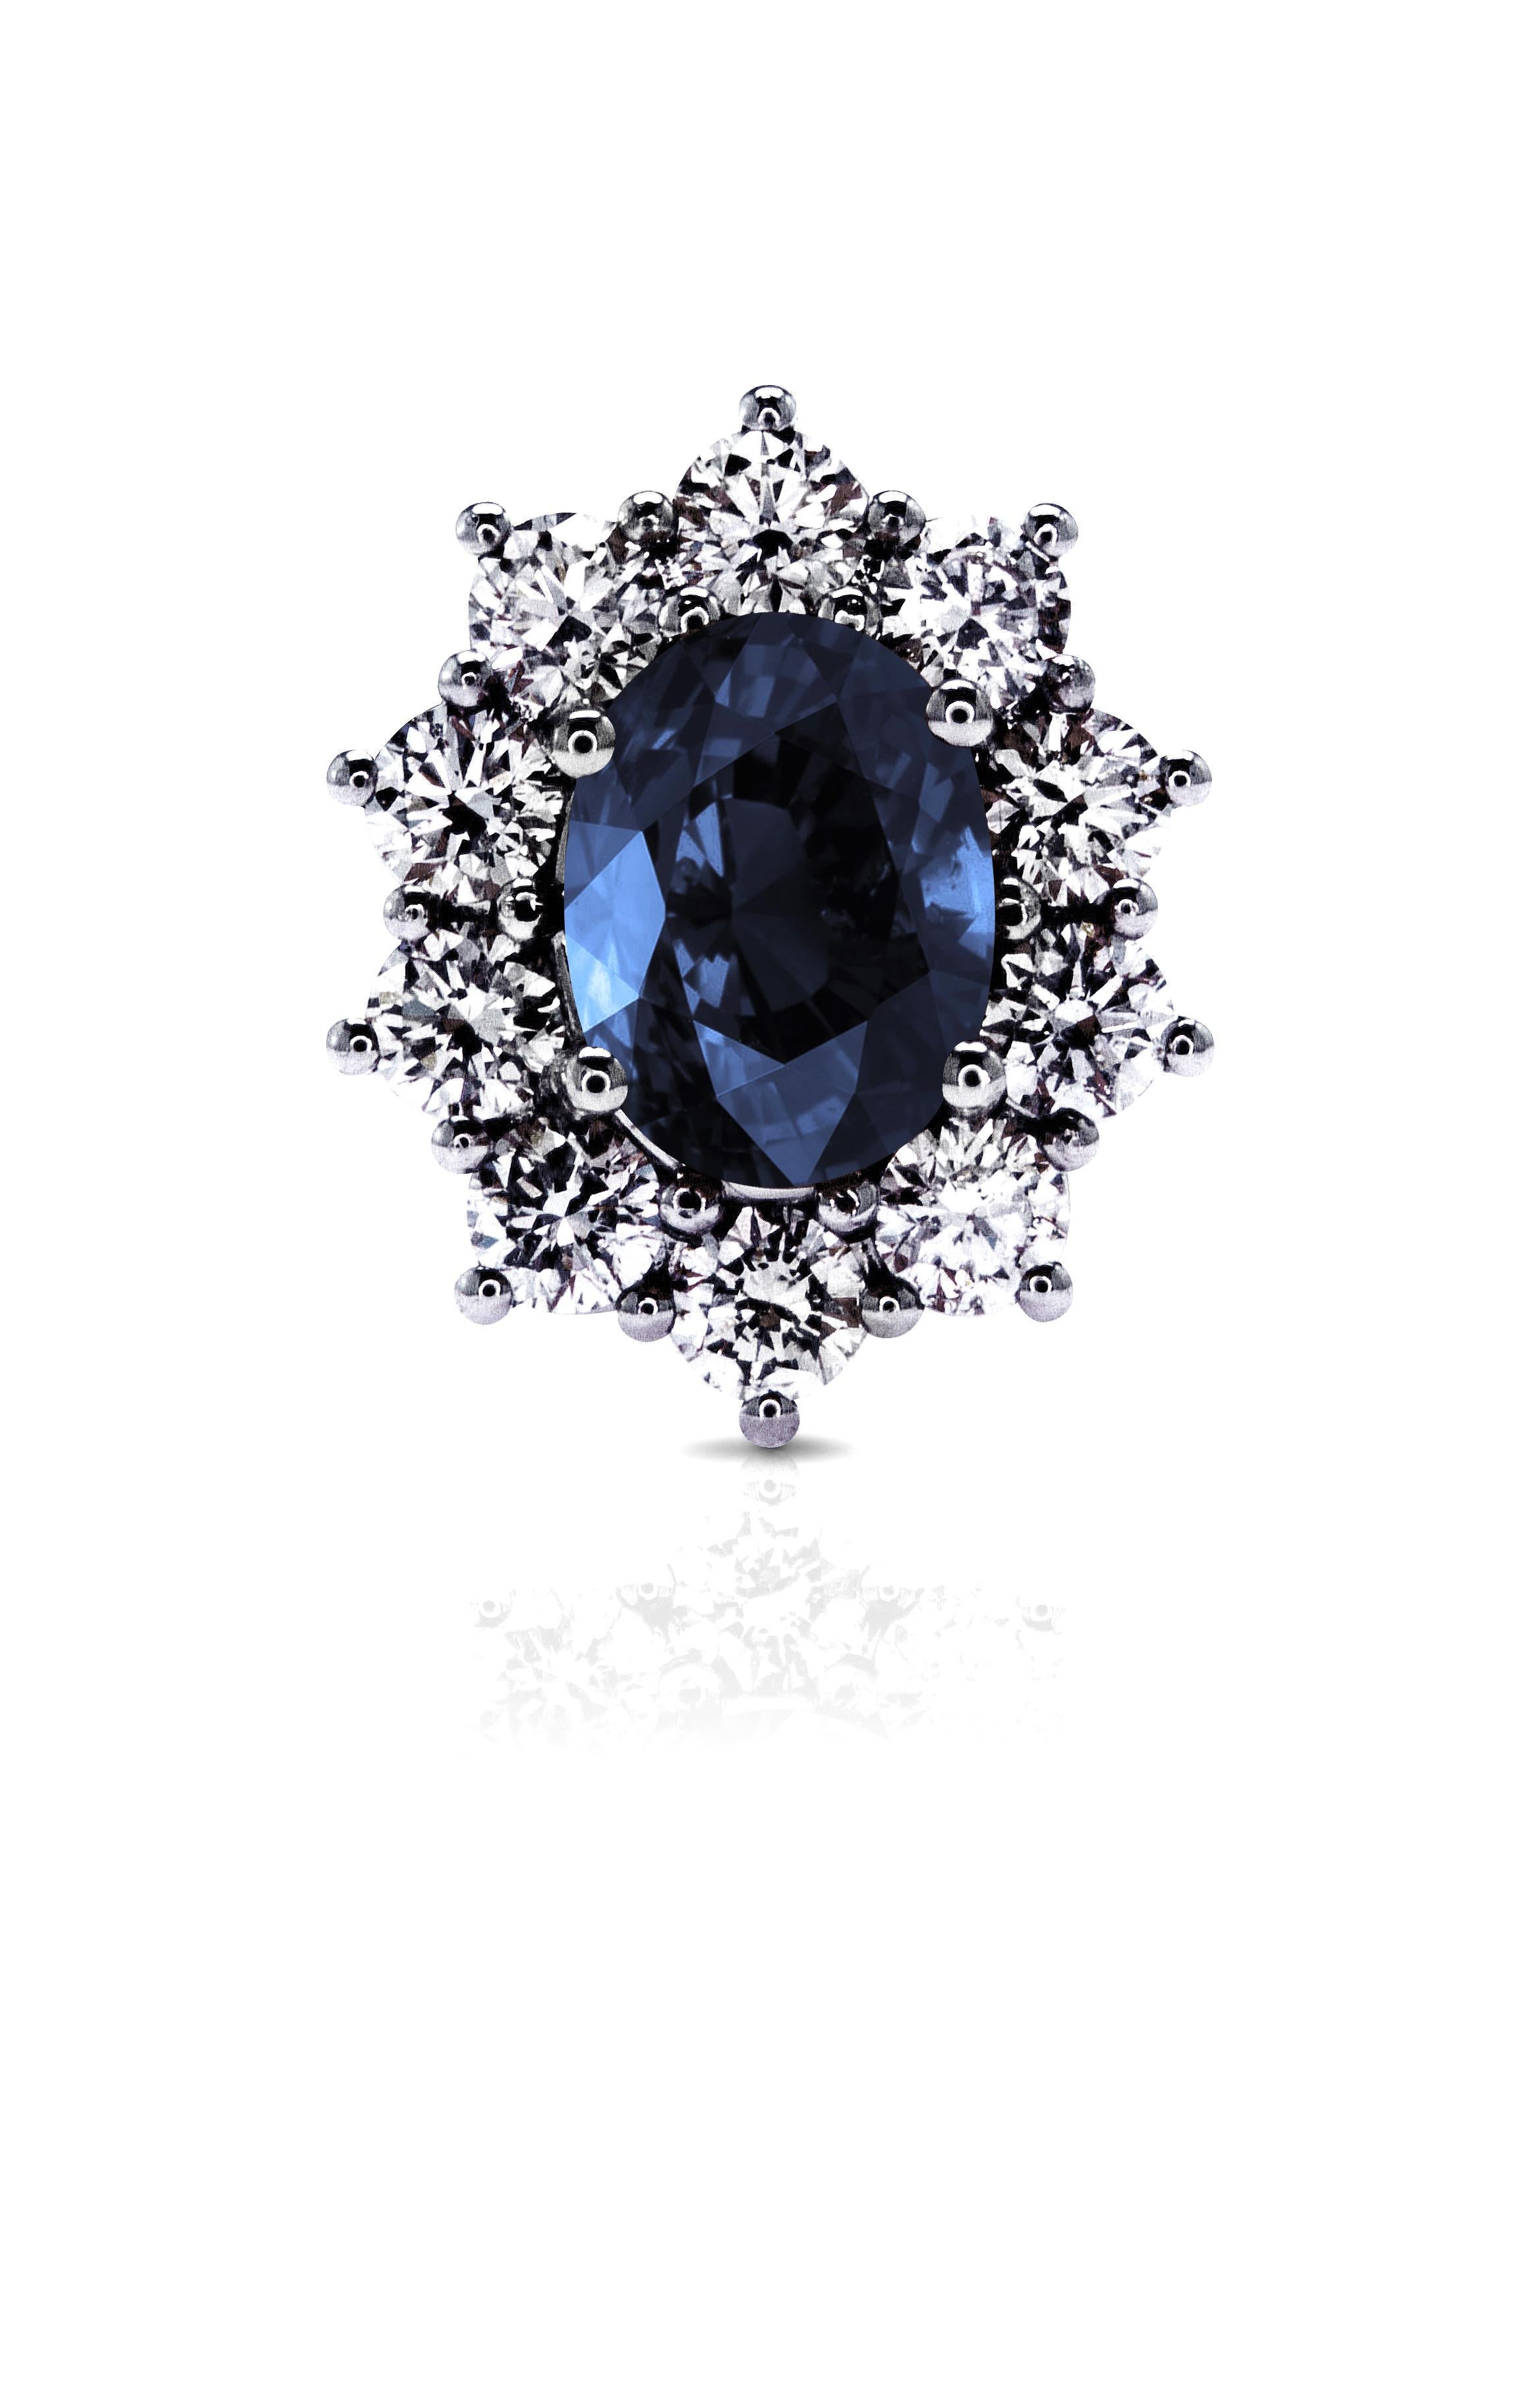 These 2.48 Carat Blue Sapphire 1.63 Ct Diamond stud earrings are set in 18Kt white Gold and from the Sunflower Grand collection. 

The studs are designed with the Sunflower concept, to radiate light and beauty. With a deep Blue Sapphire in the bud